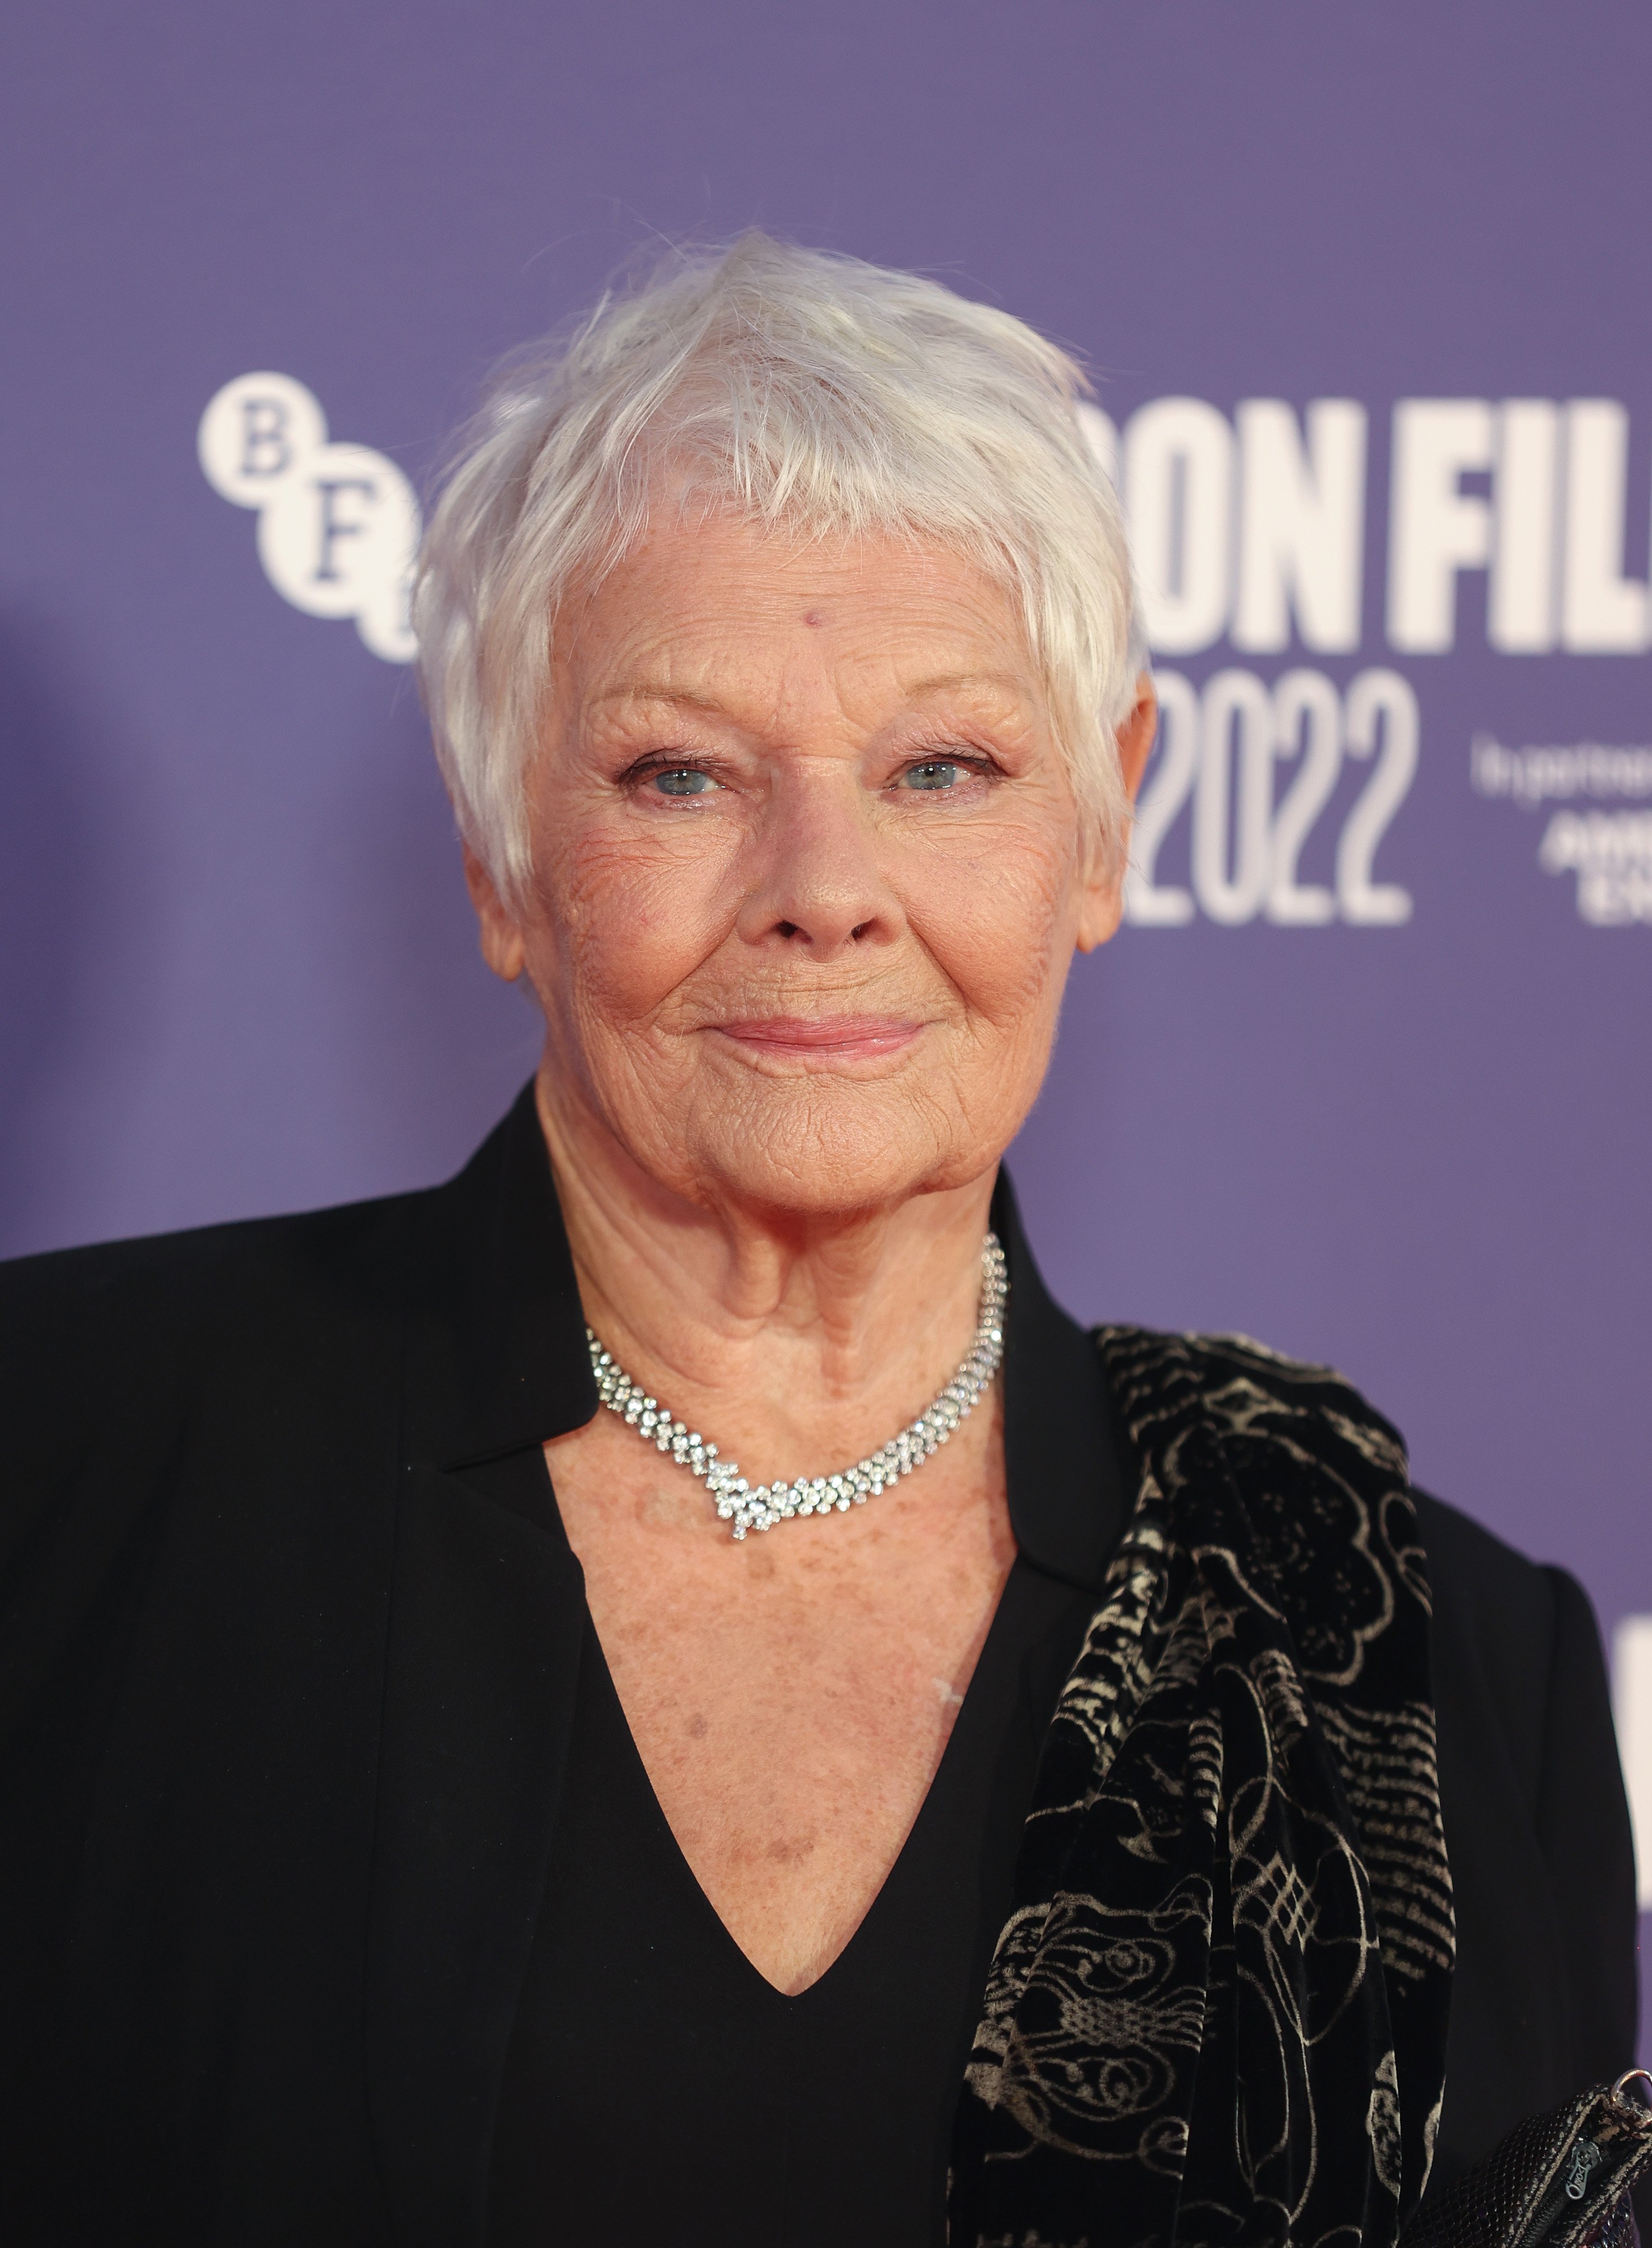 Judi Dench attends the "Allelujah" European Premiere during the 66th BFI London Film Festival at Southbank Centre on October 09, 2022, in London, England. | Source: Getty Images